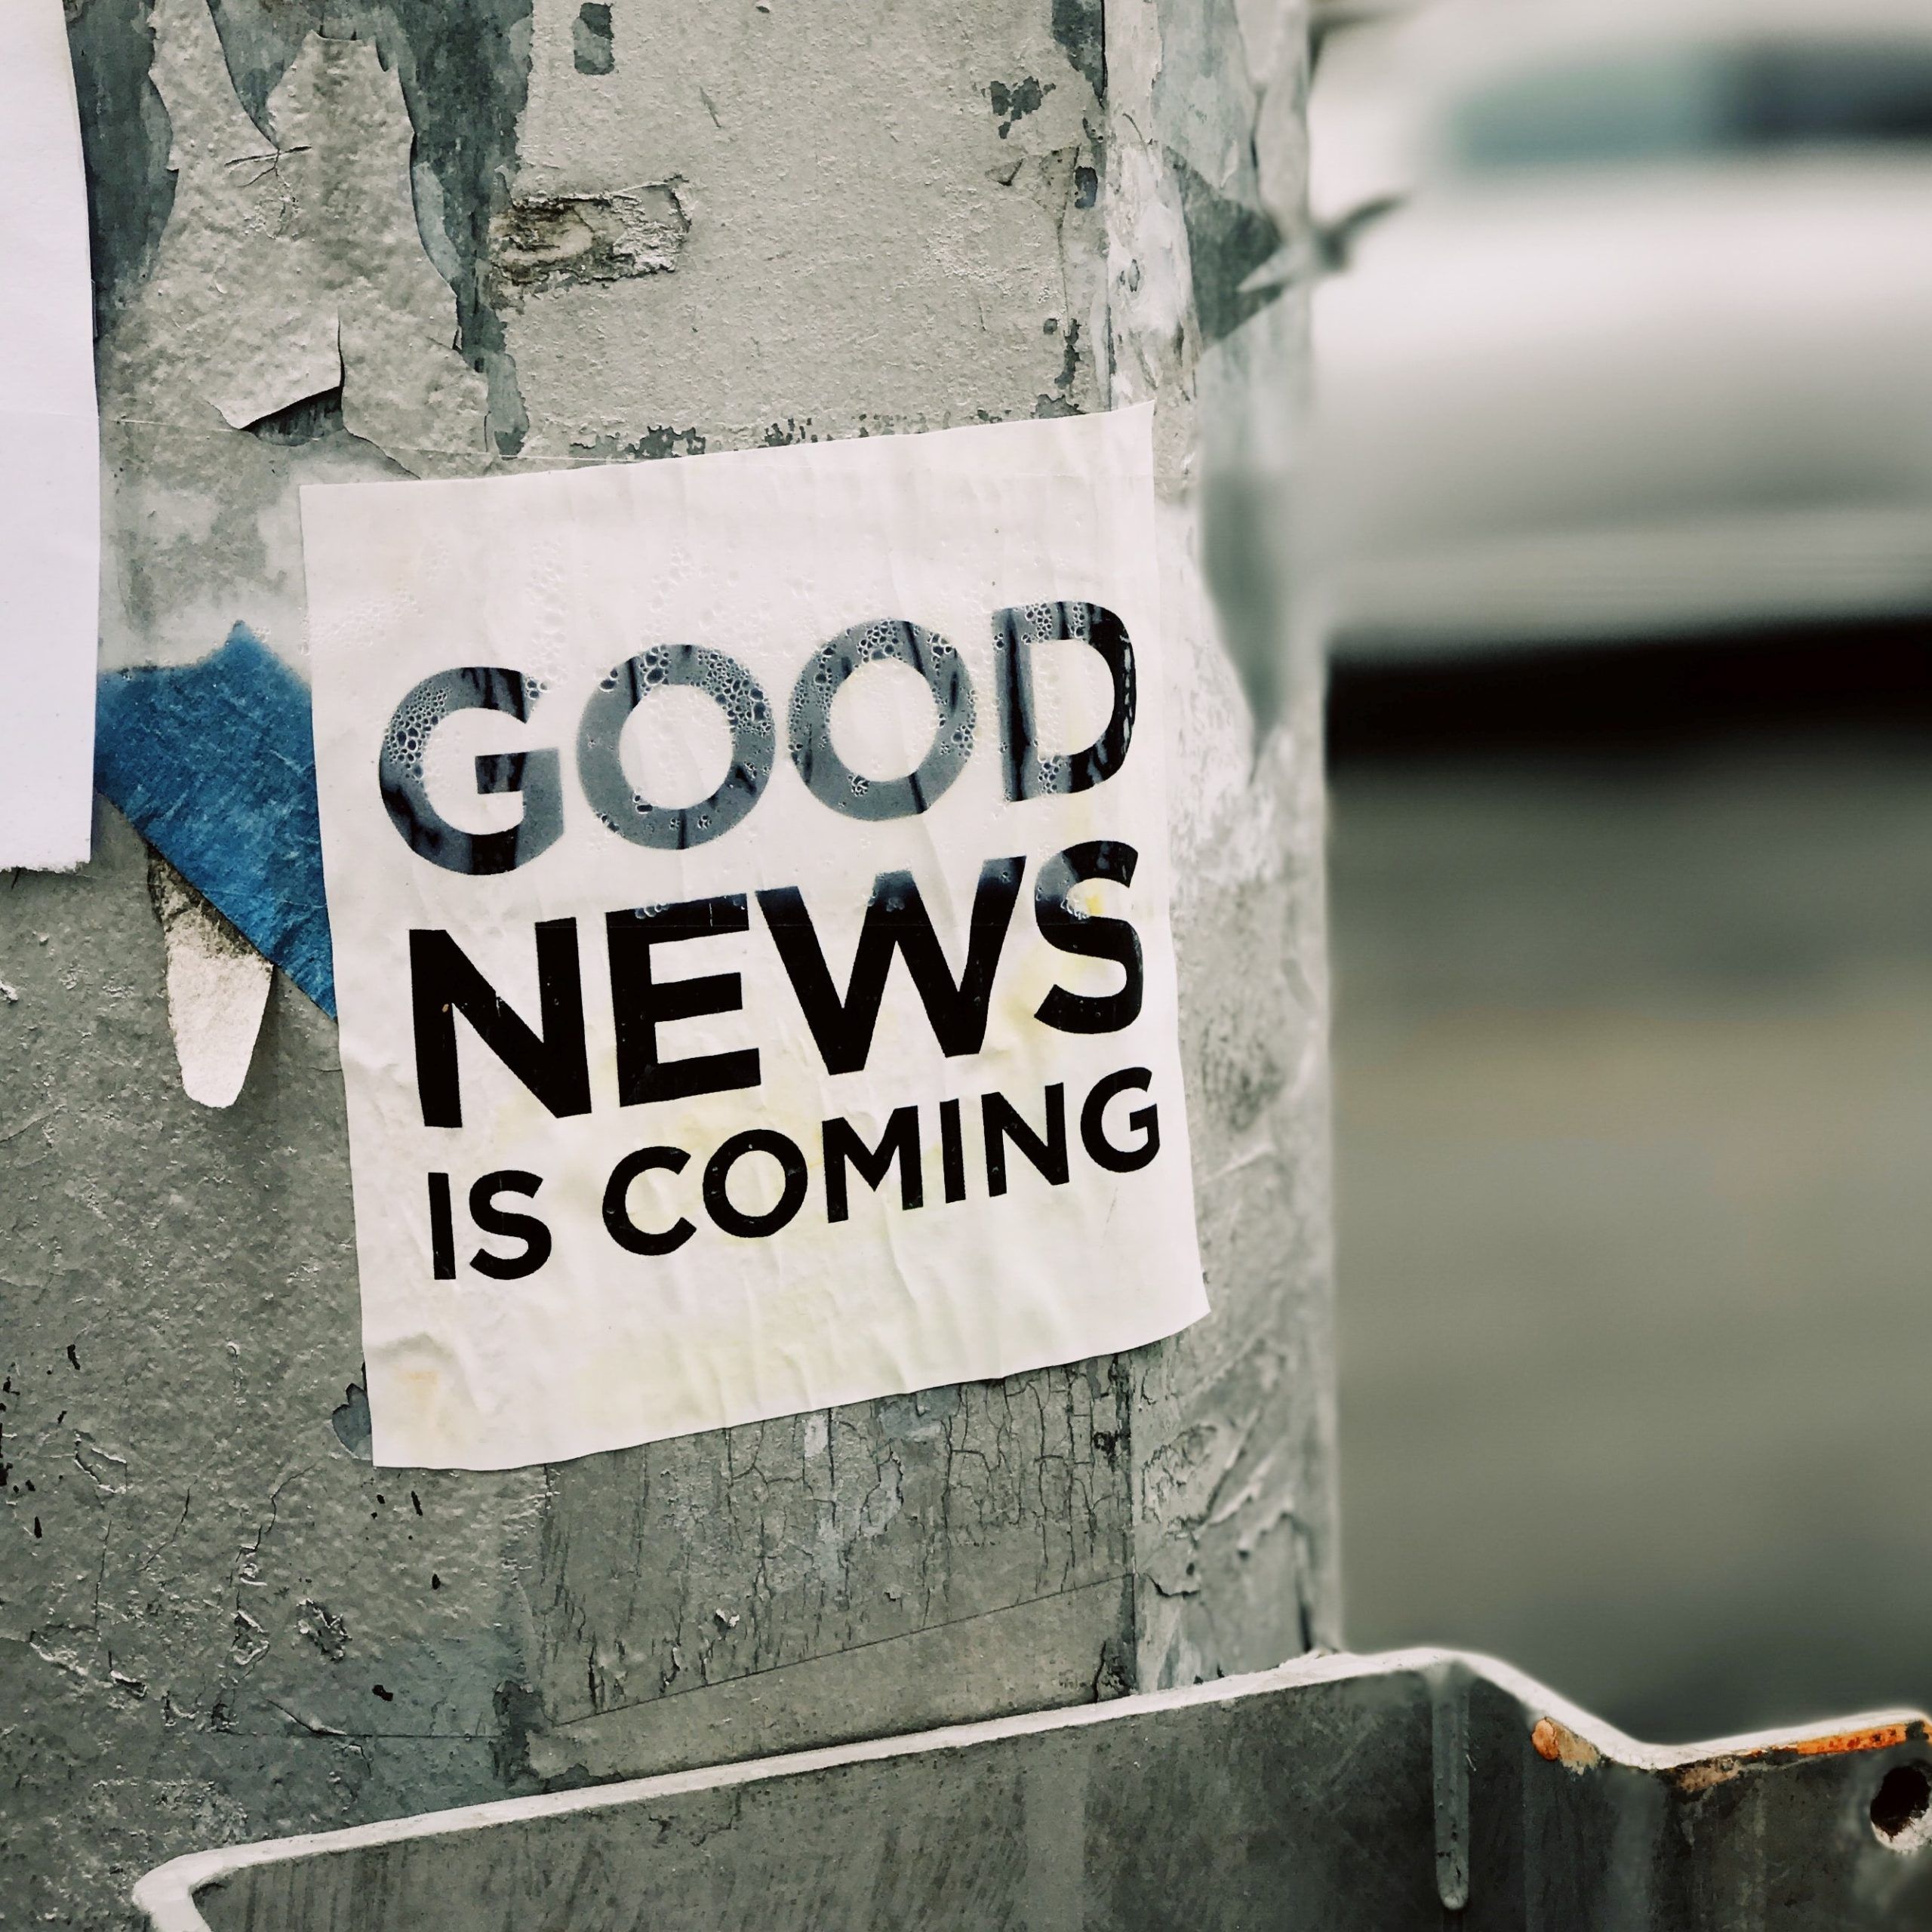 "Good News Is Coming" posted on light post